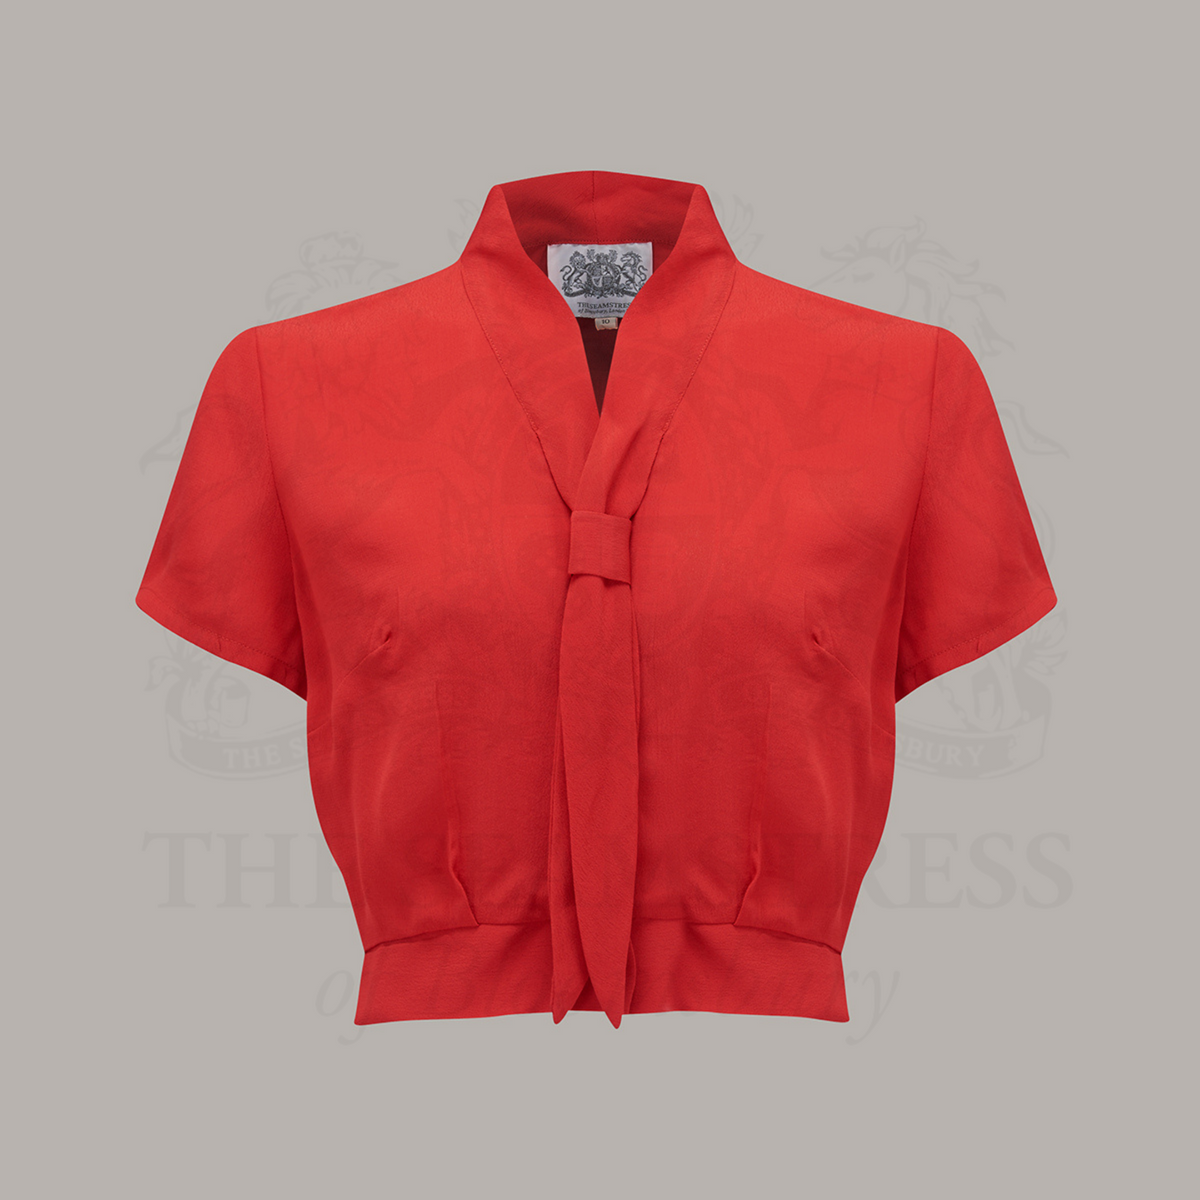 A 1940s sailor style blouse with short sleeves in red. Featuring a roll style collar to give the iconic sailor look. Small buttons run down the front of the blouse for fastening but are hidden by the long collar.